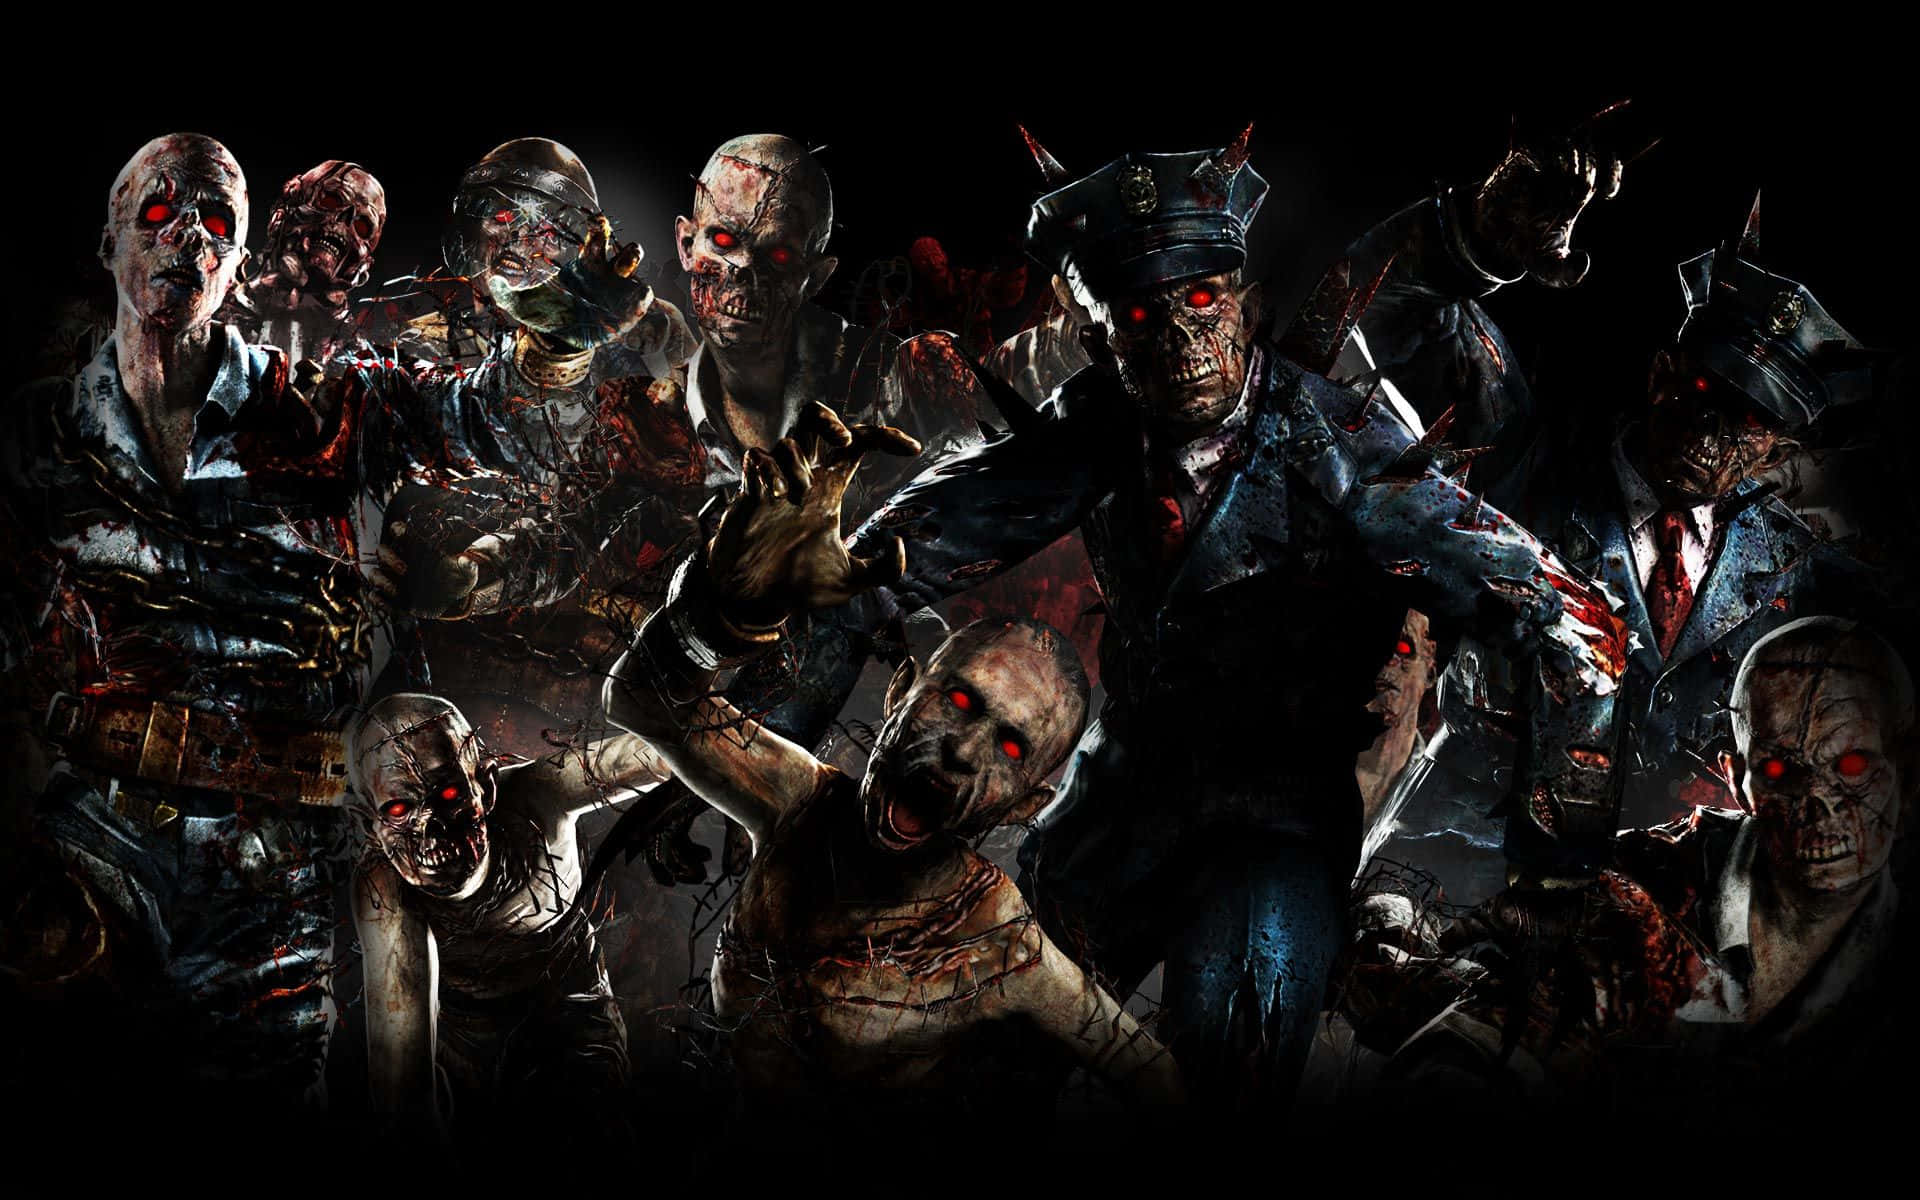 Zombies In A Dark Background Wallpaper